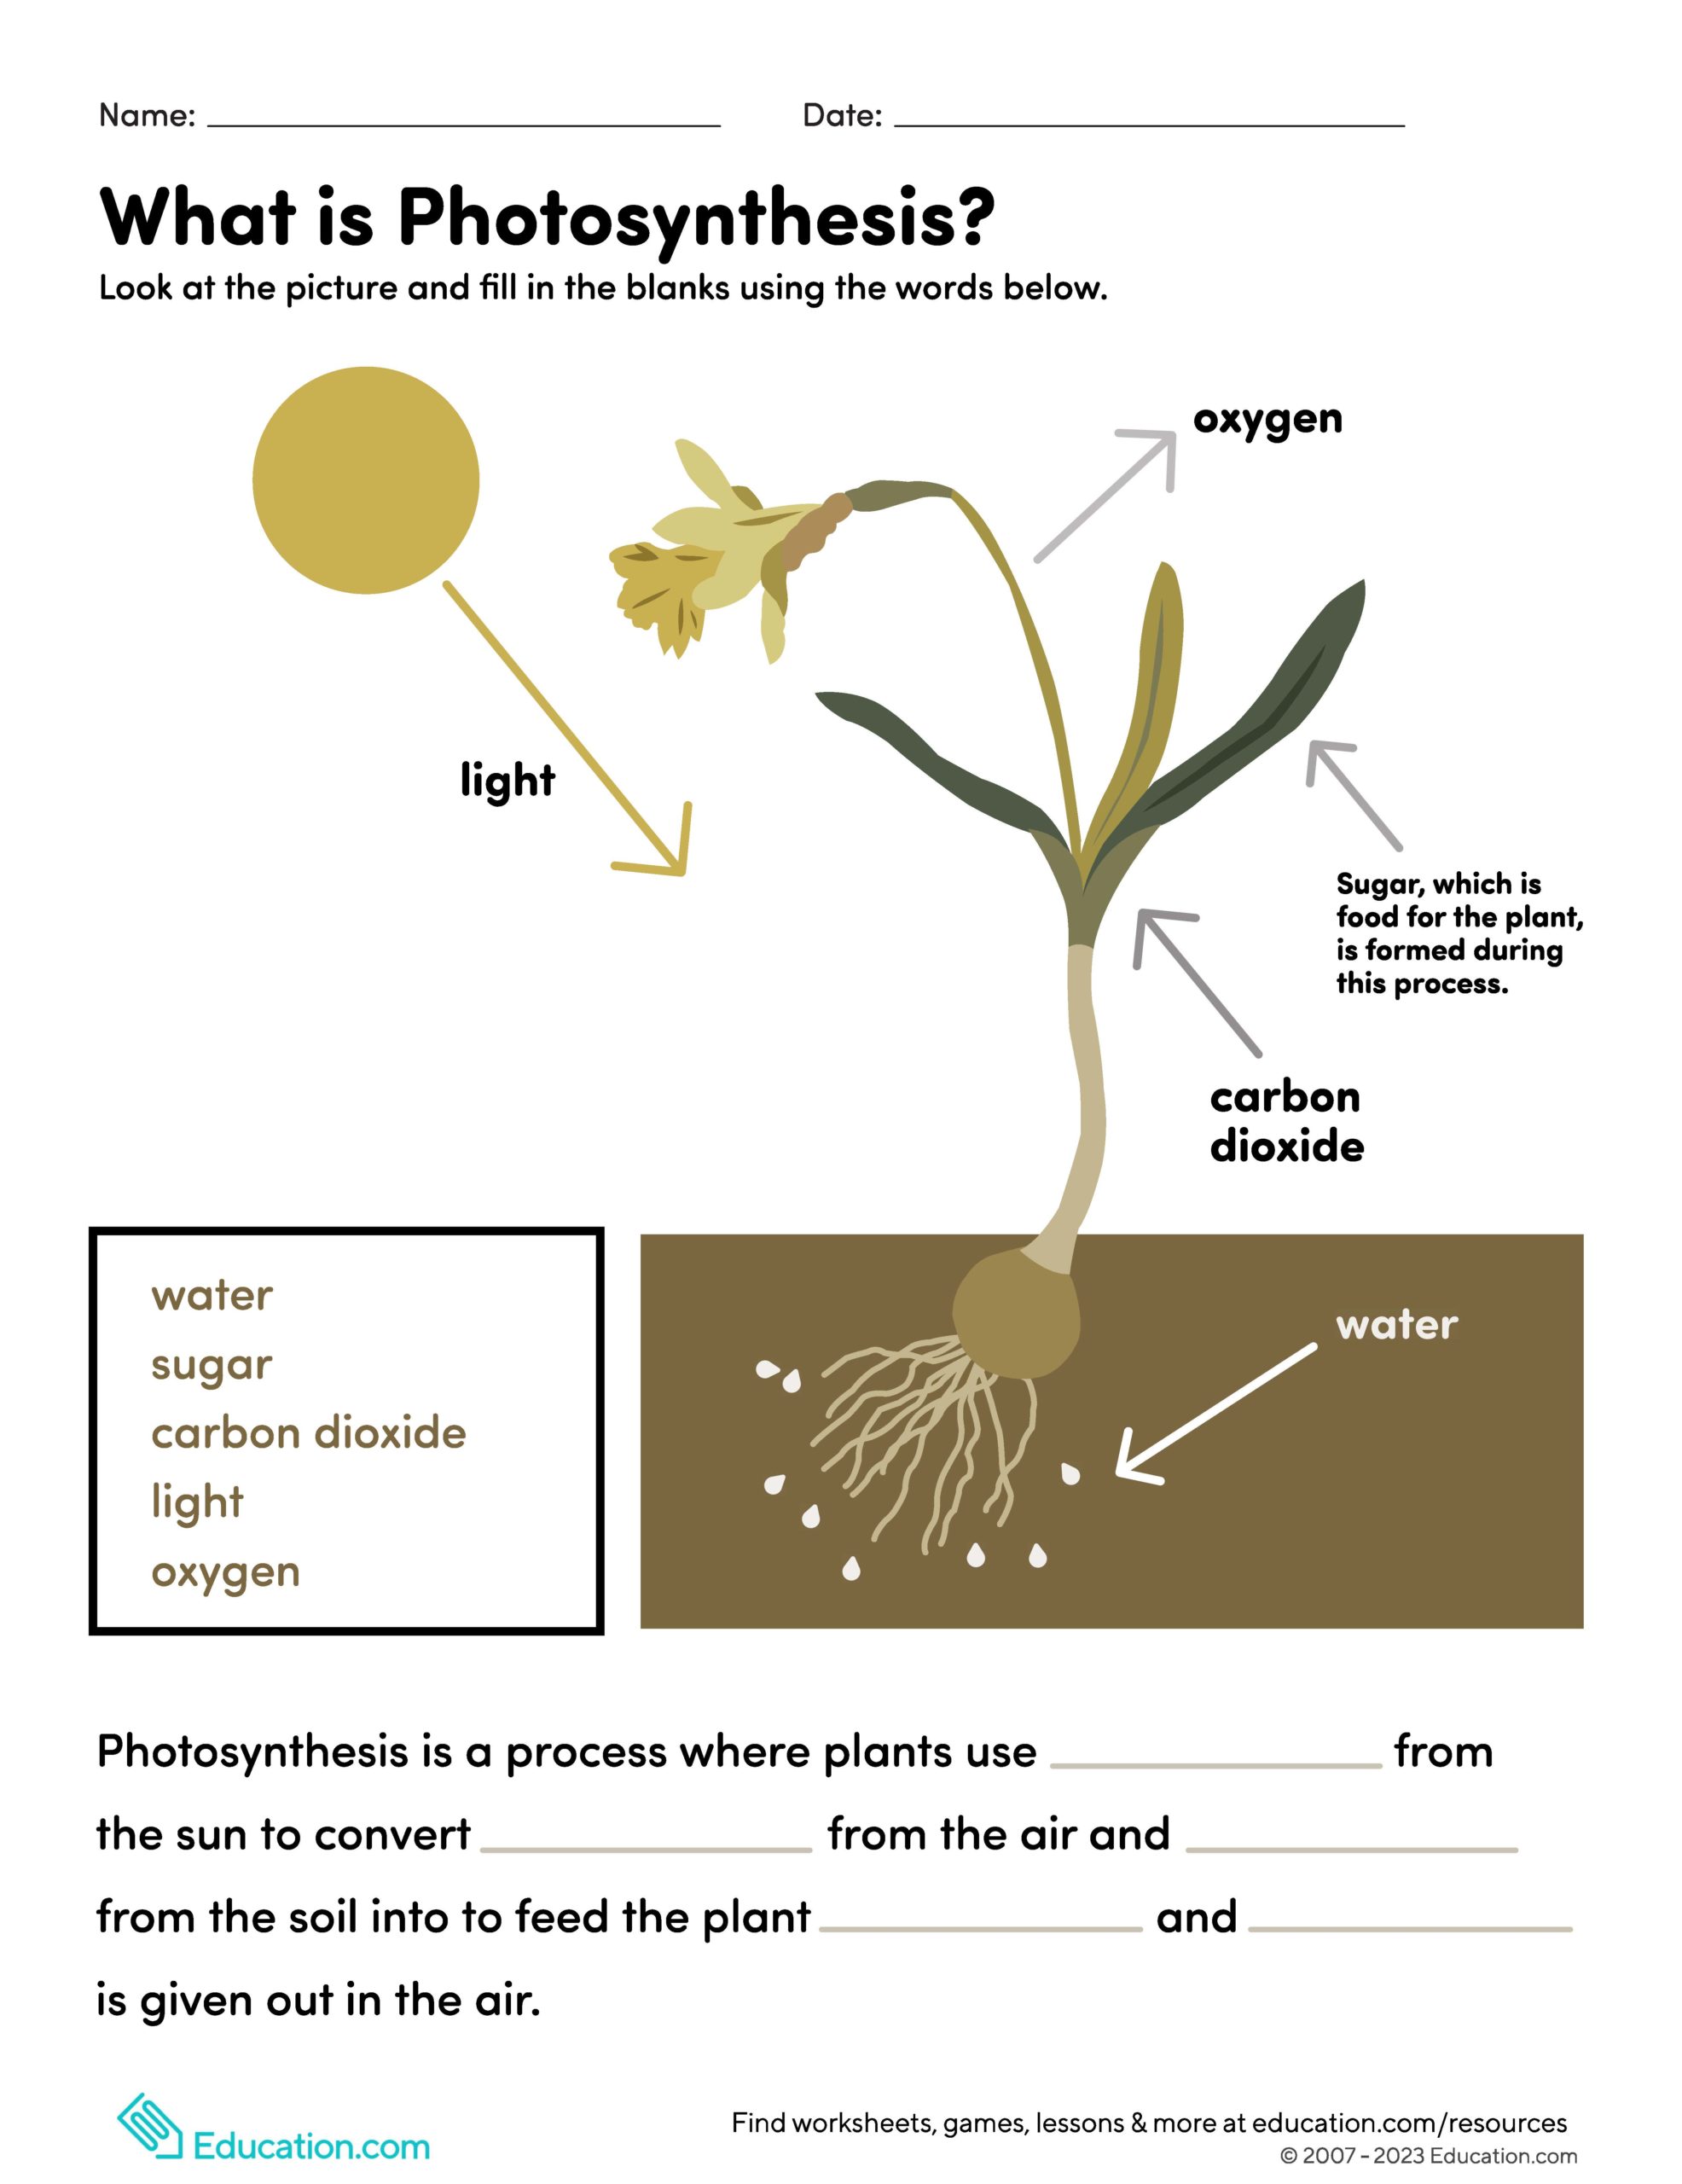 What is photosynthesis worksheet image